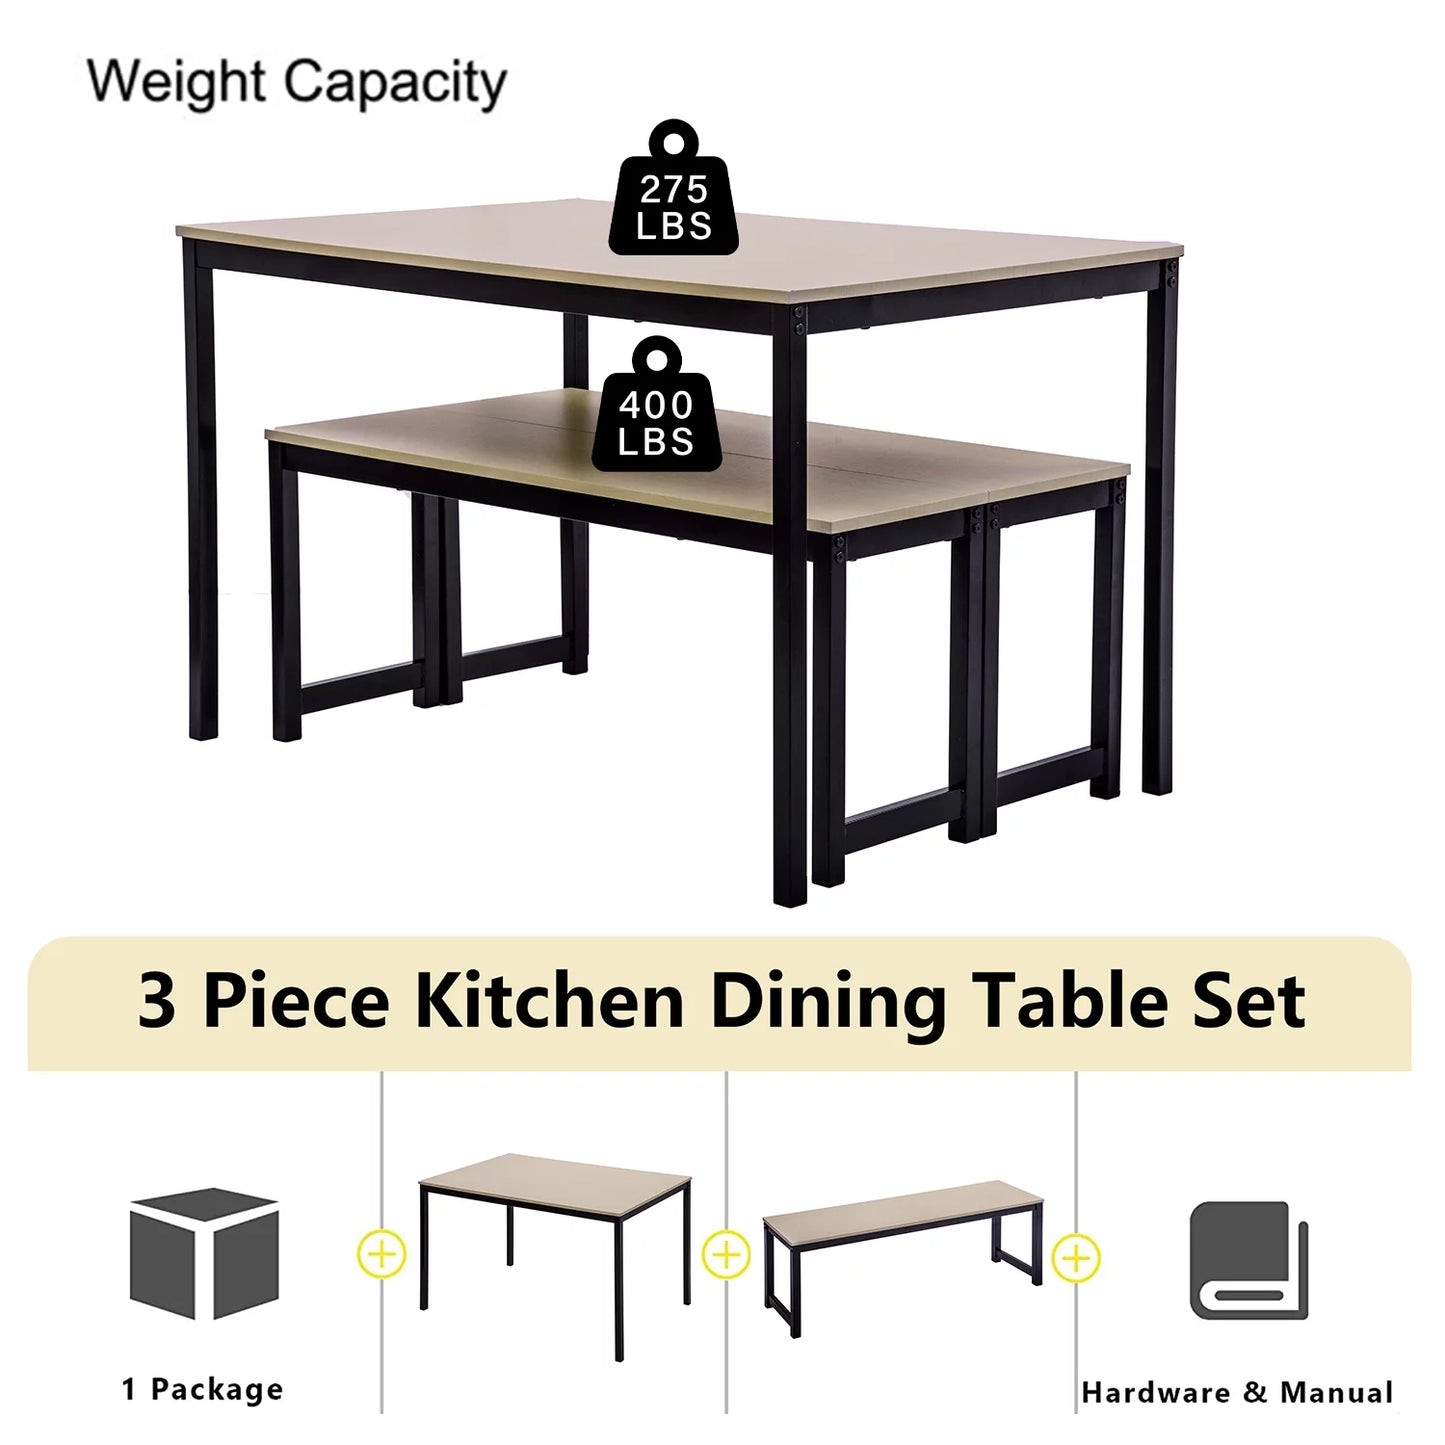 3 Piece Dining Table Set, Modern Wood Table Top Dining Table Set with Bench and Metal Frame, Breakfast Nook Dining Room Set, Dining Set for 4, Kitchen Living Dining Room Furniture, Black